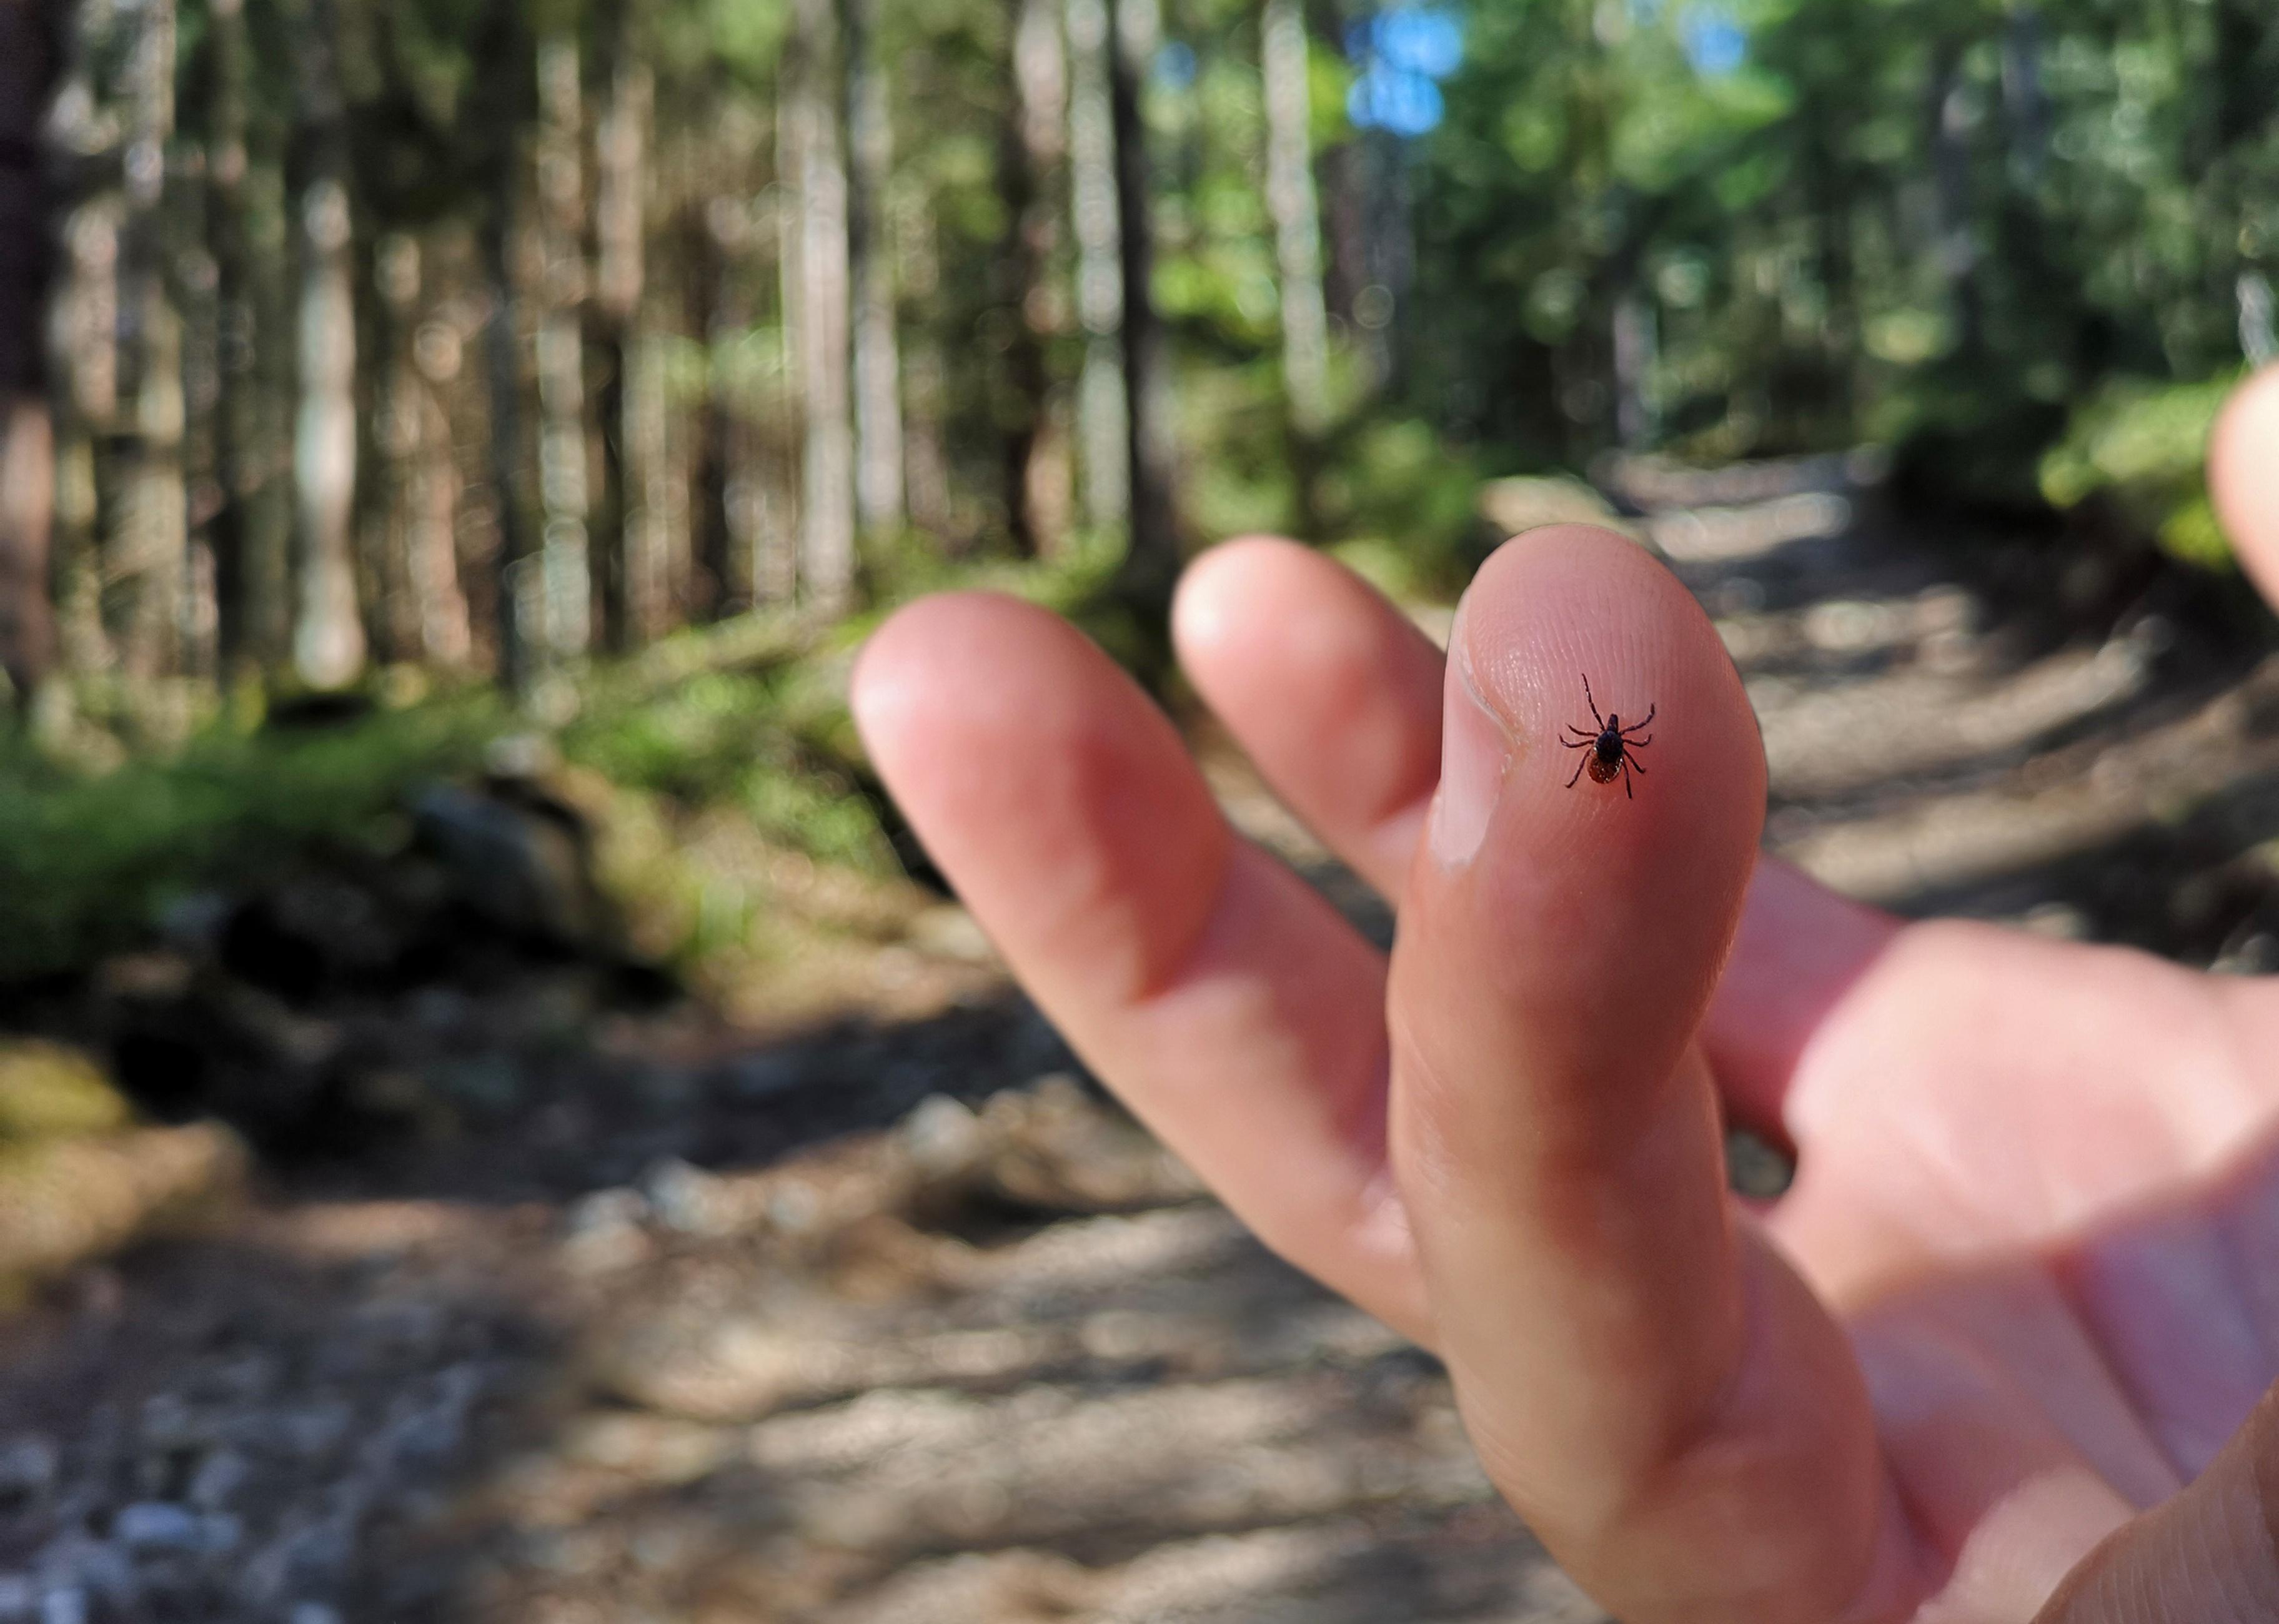 A tick is sitting on the finger of man in forest on hiking path.